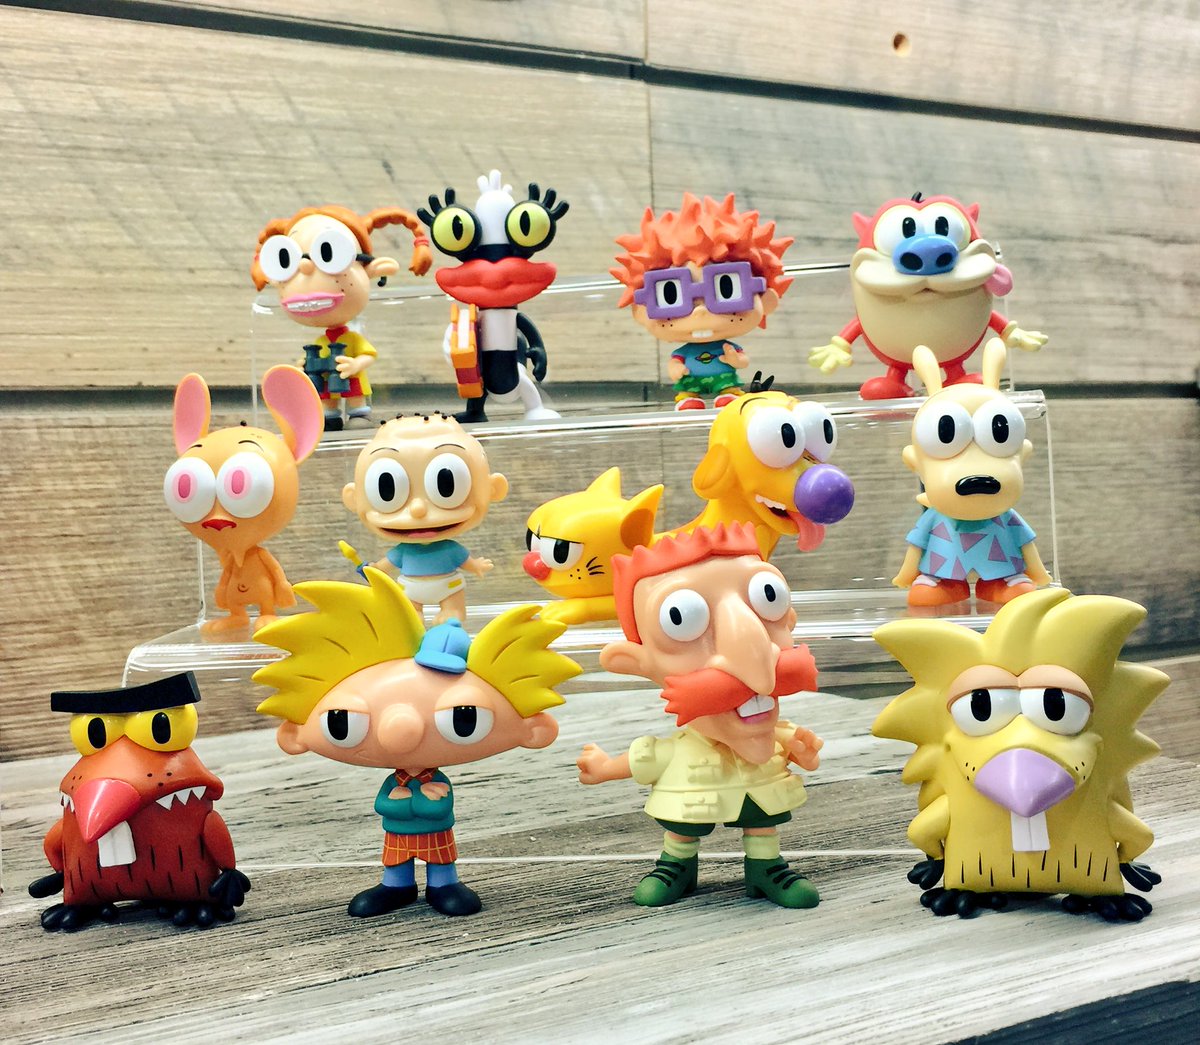 Funko on Twitter: "Reply with your favorite Nickelodeon Mystery Mini!  #FunkoTFNY https://t.co/arHALdEoud" / Twitter